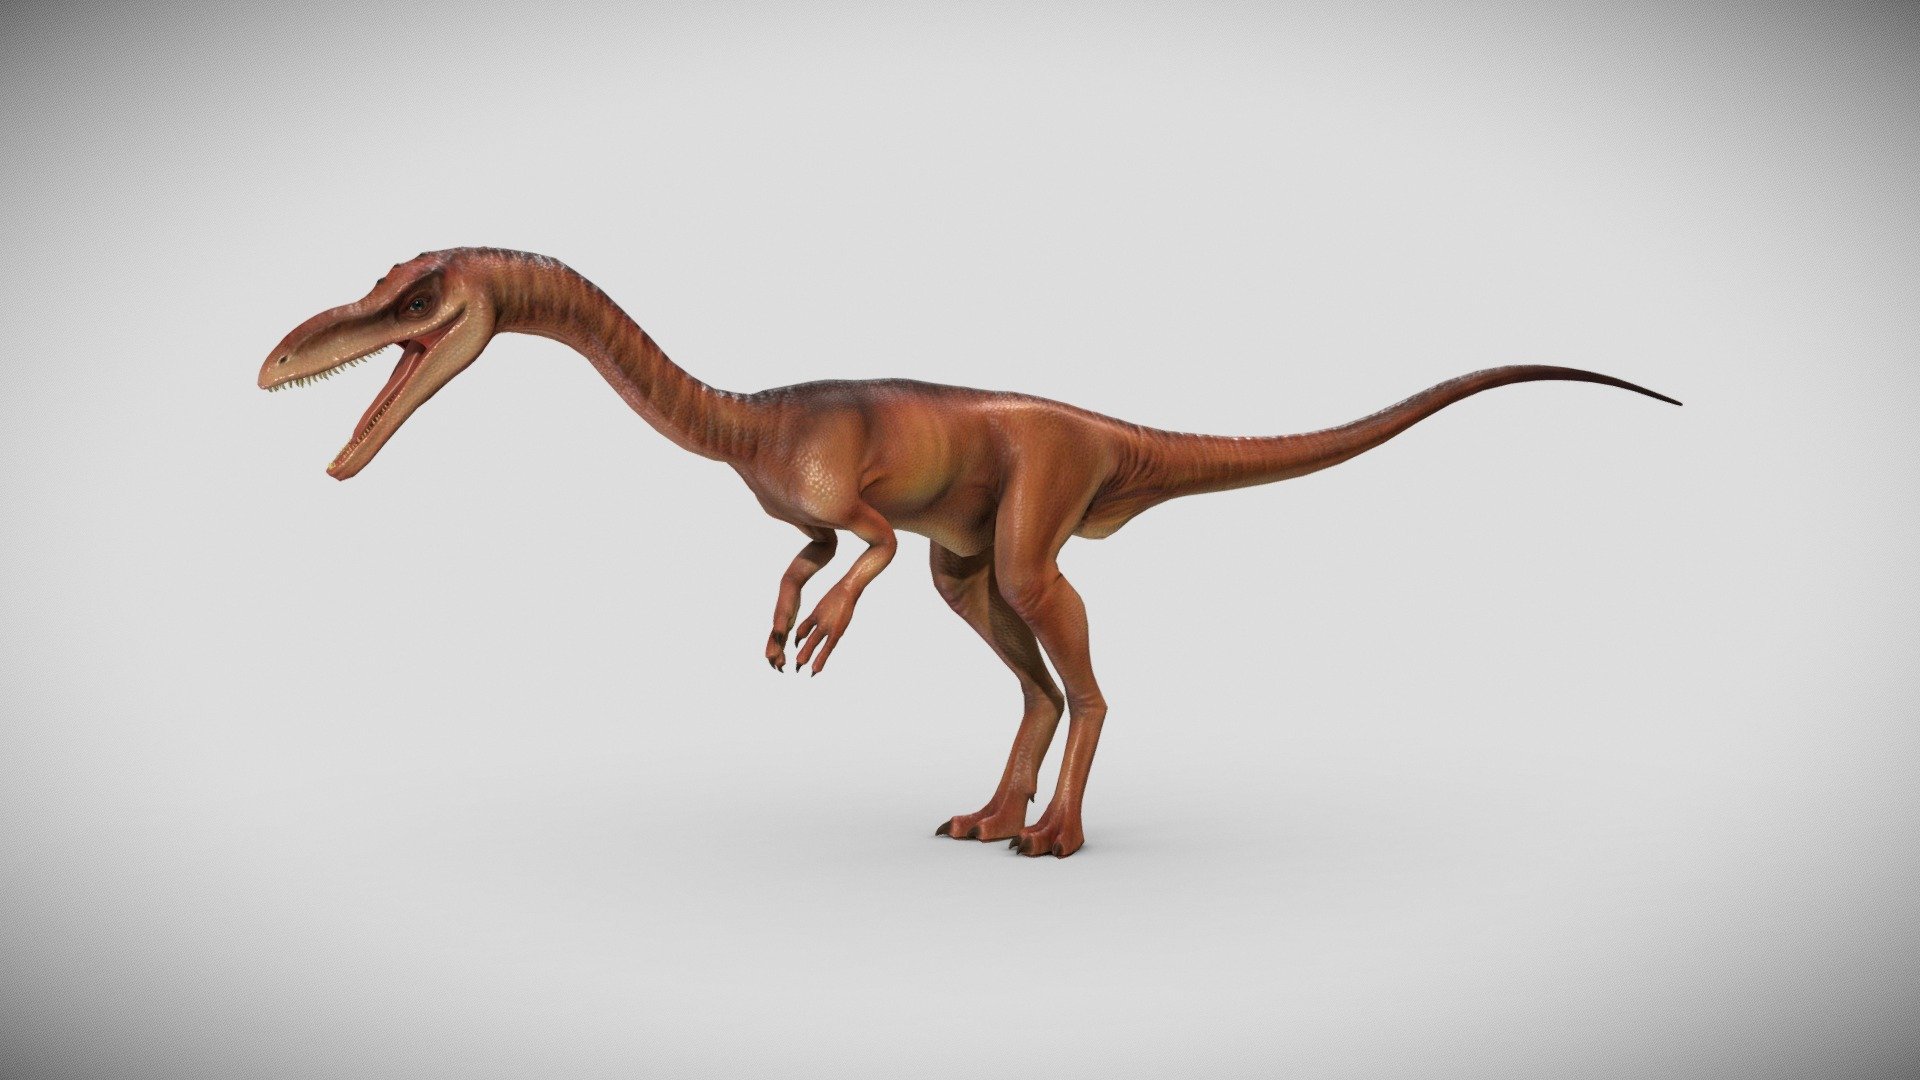 A Coelophysis model with textures. Model can be subdivided if high-poly is needed.

Color, Specular/Gloss, Occlusion, Cavity, and Displacement maps are 4096.

Normal Map is 8192.

Collada, FBX, and OBJ formats included 3d model